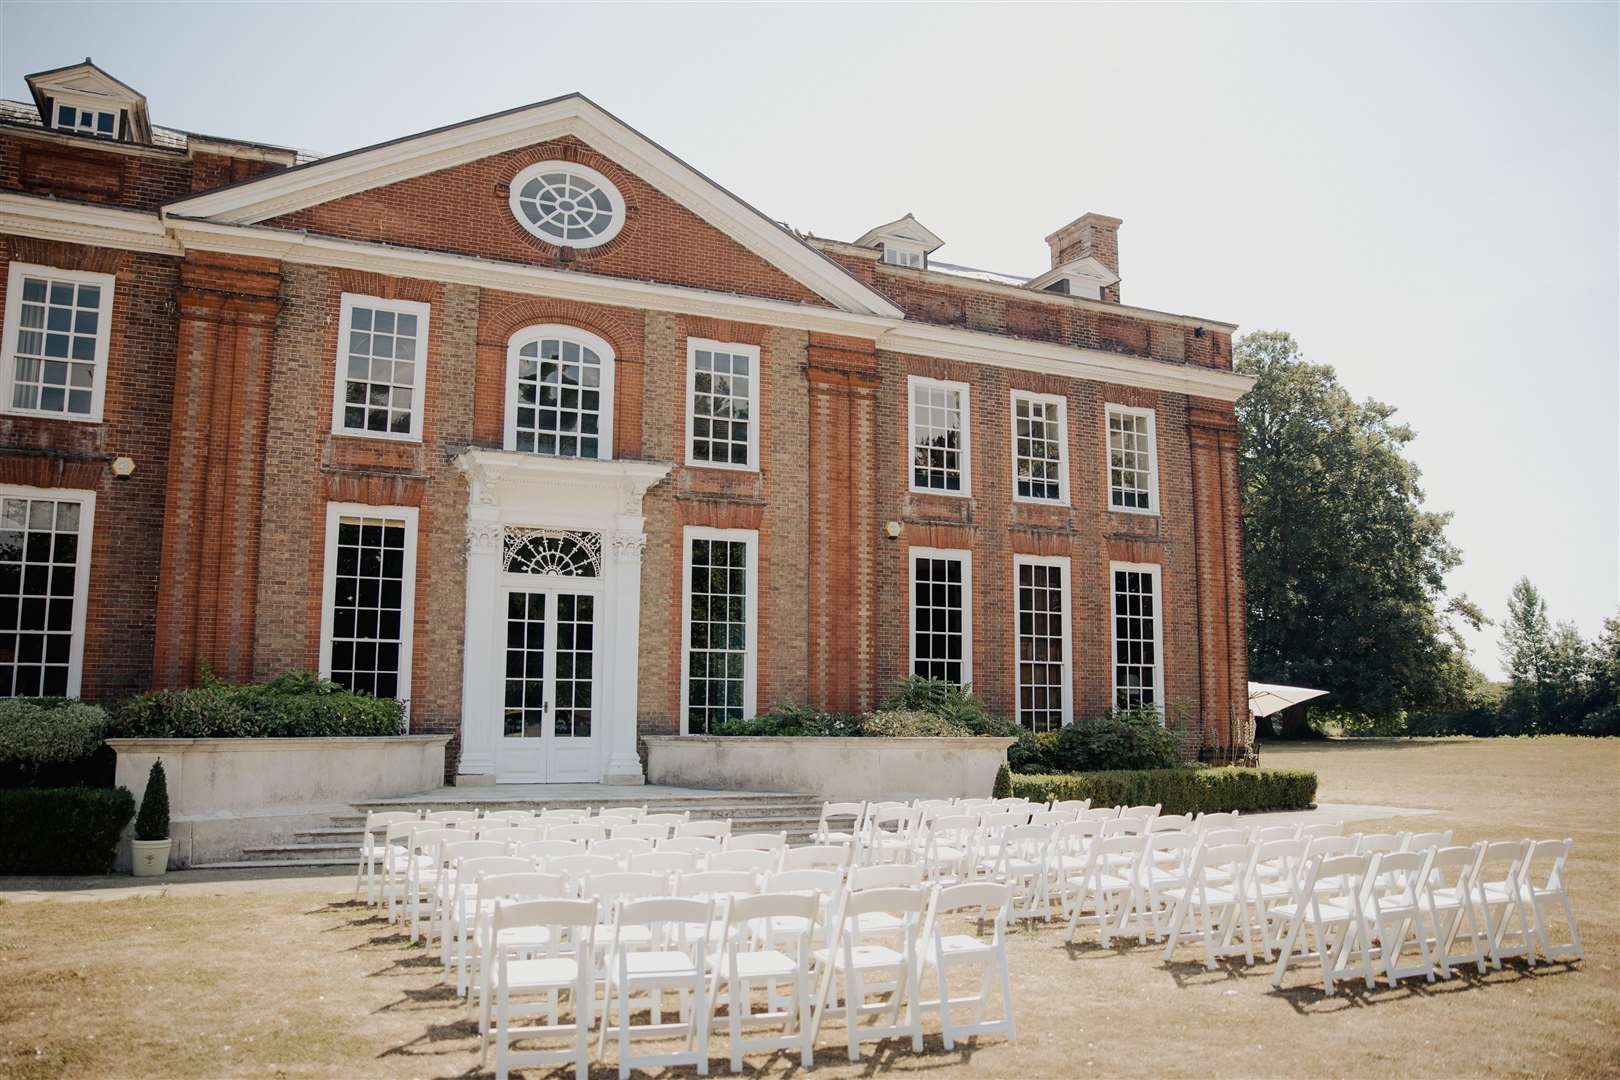 Bradbourne House in East Malling has offered to step in and help any bride and groom whose wedding was cancelled at Hadlow Manor Hotel. Picture: Bradbourne House